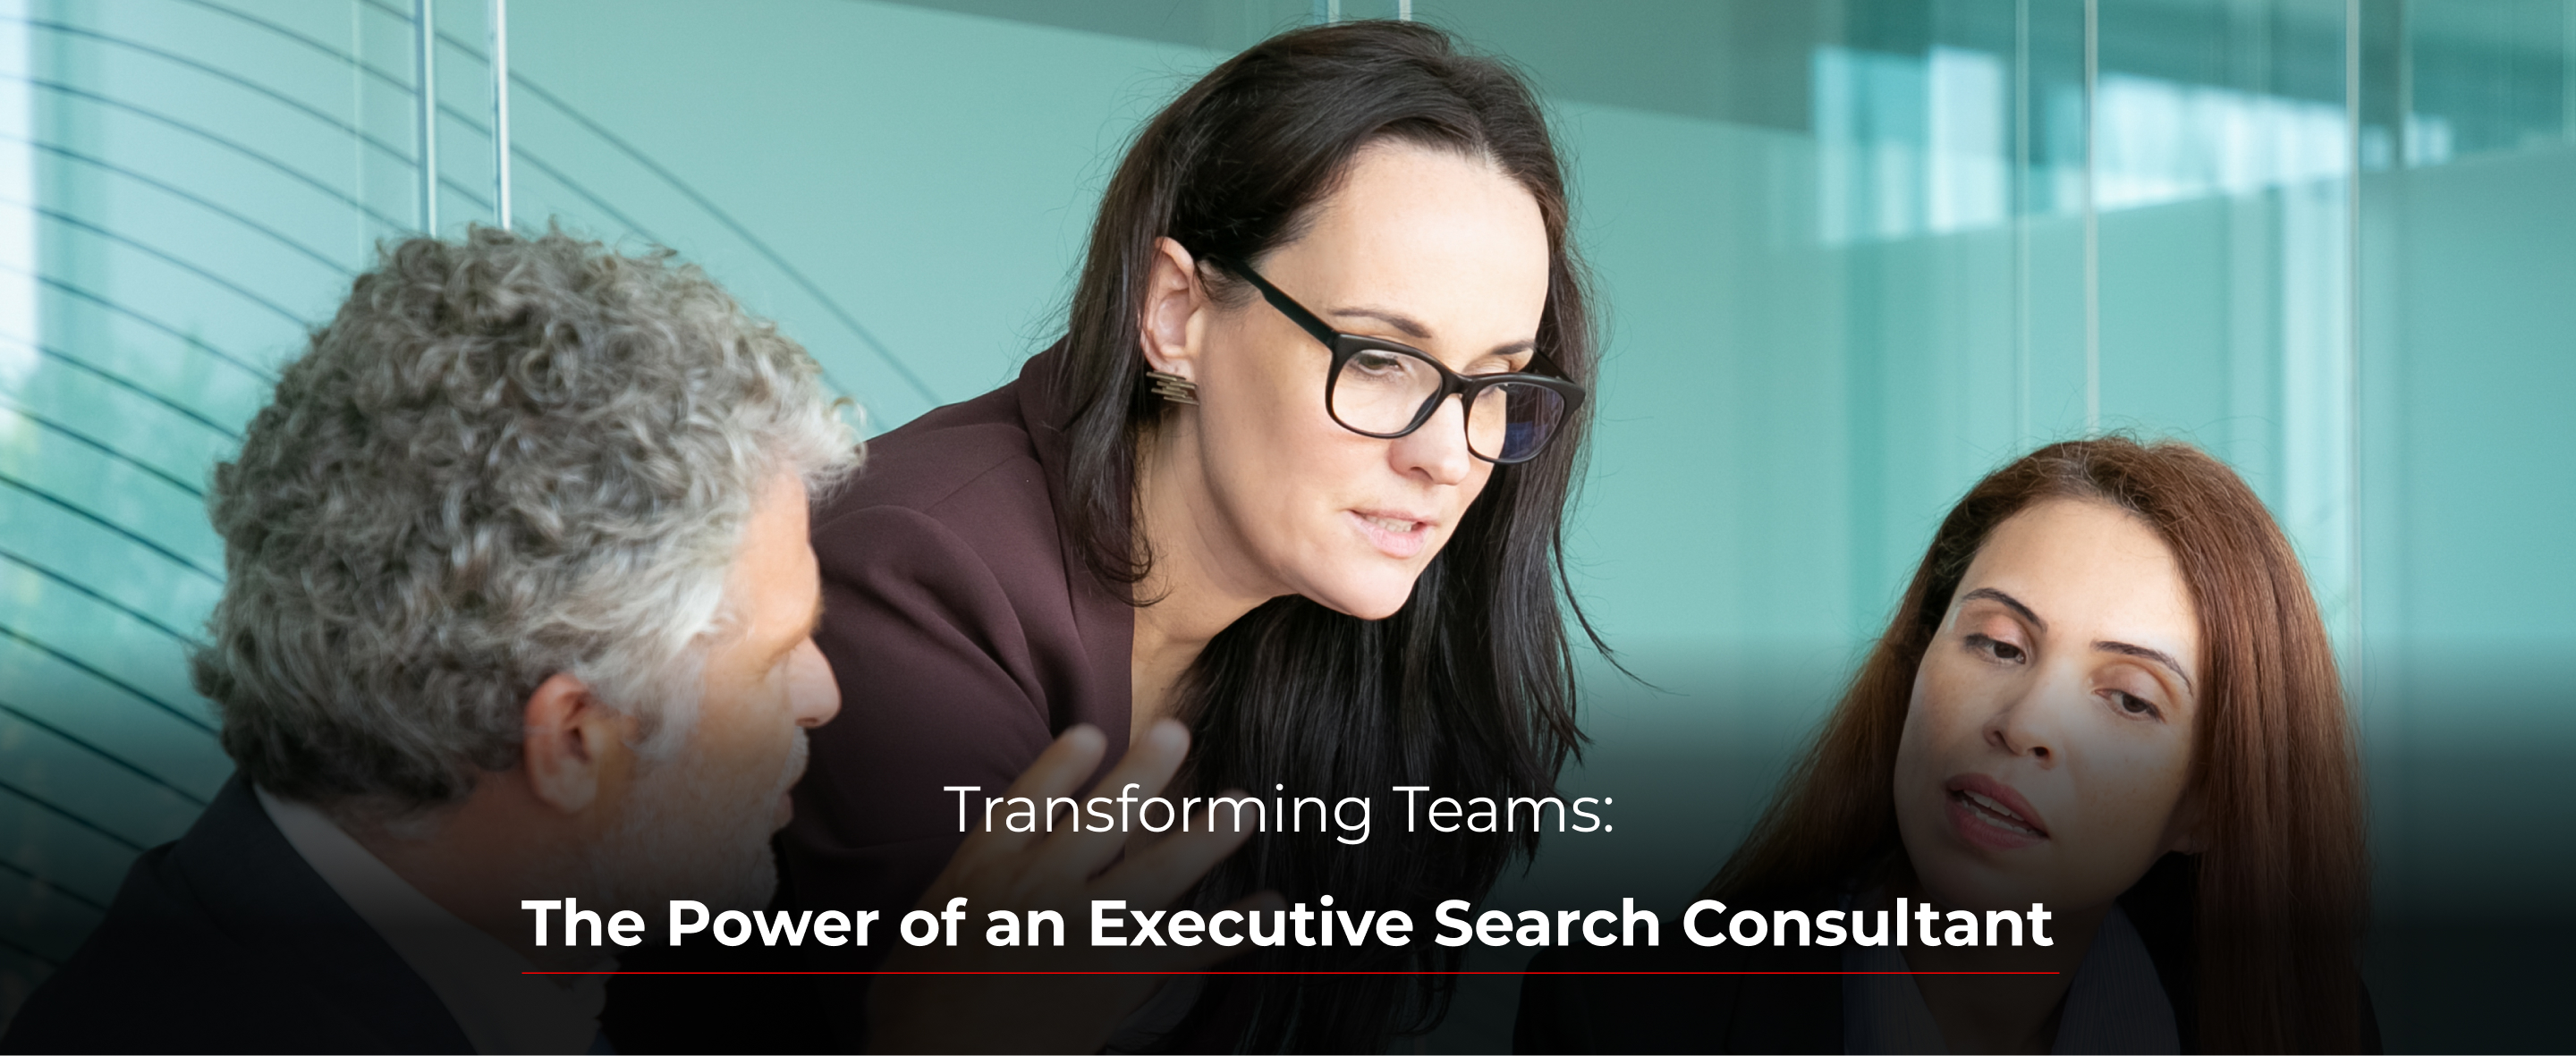 Transforming Teams: The Power of an Executive Search Consultant